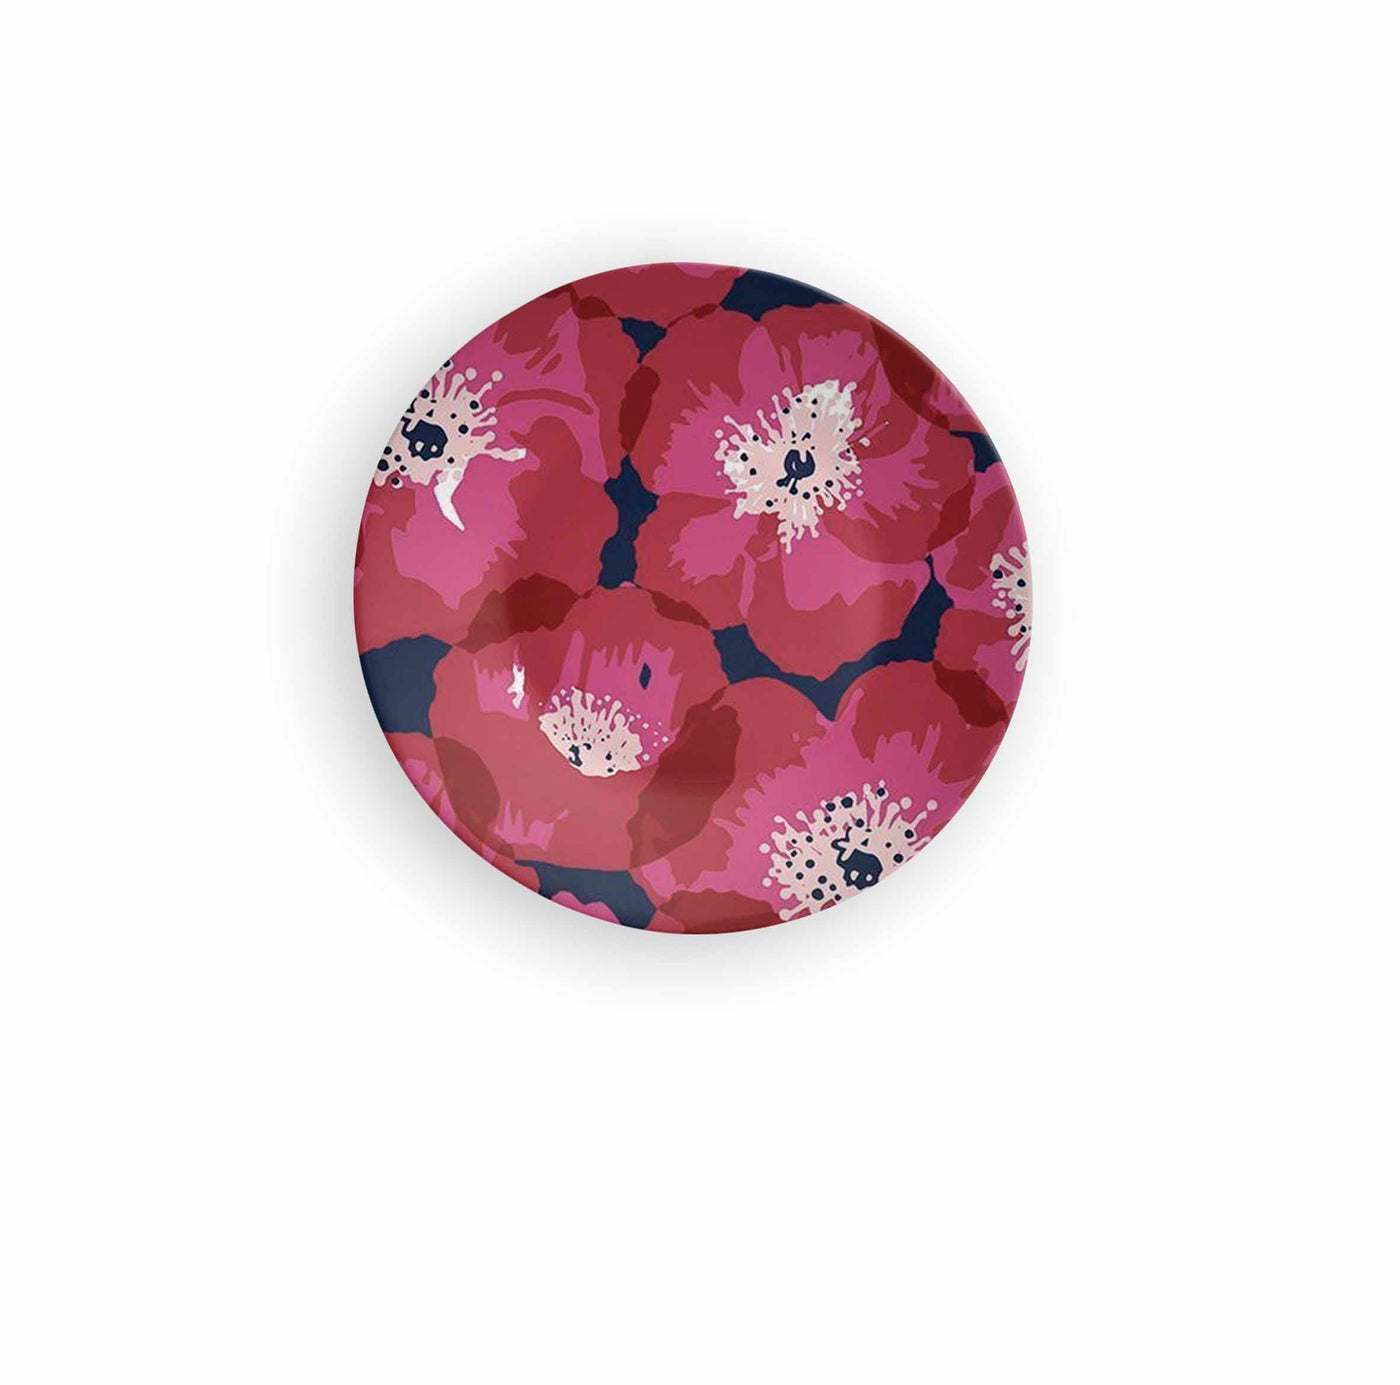 Red American Flower Art Decorative Wall Plate - Wall Decor - 2